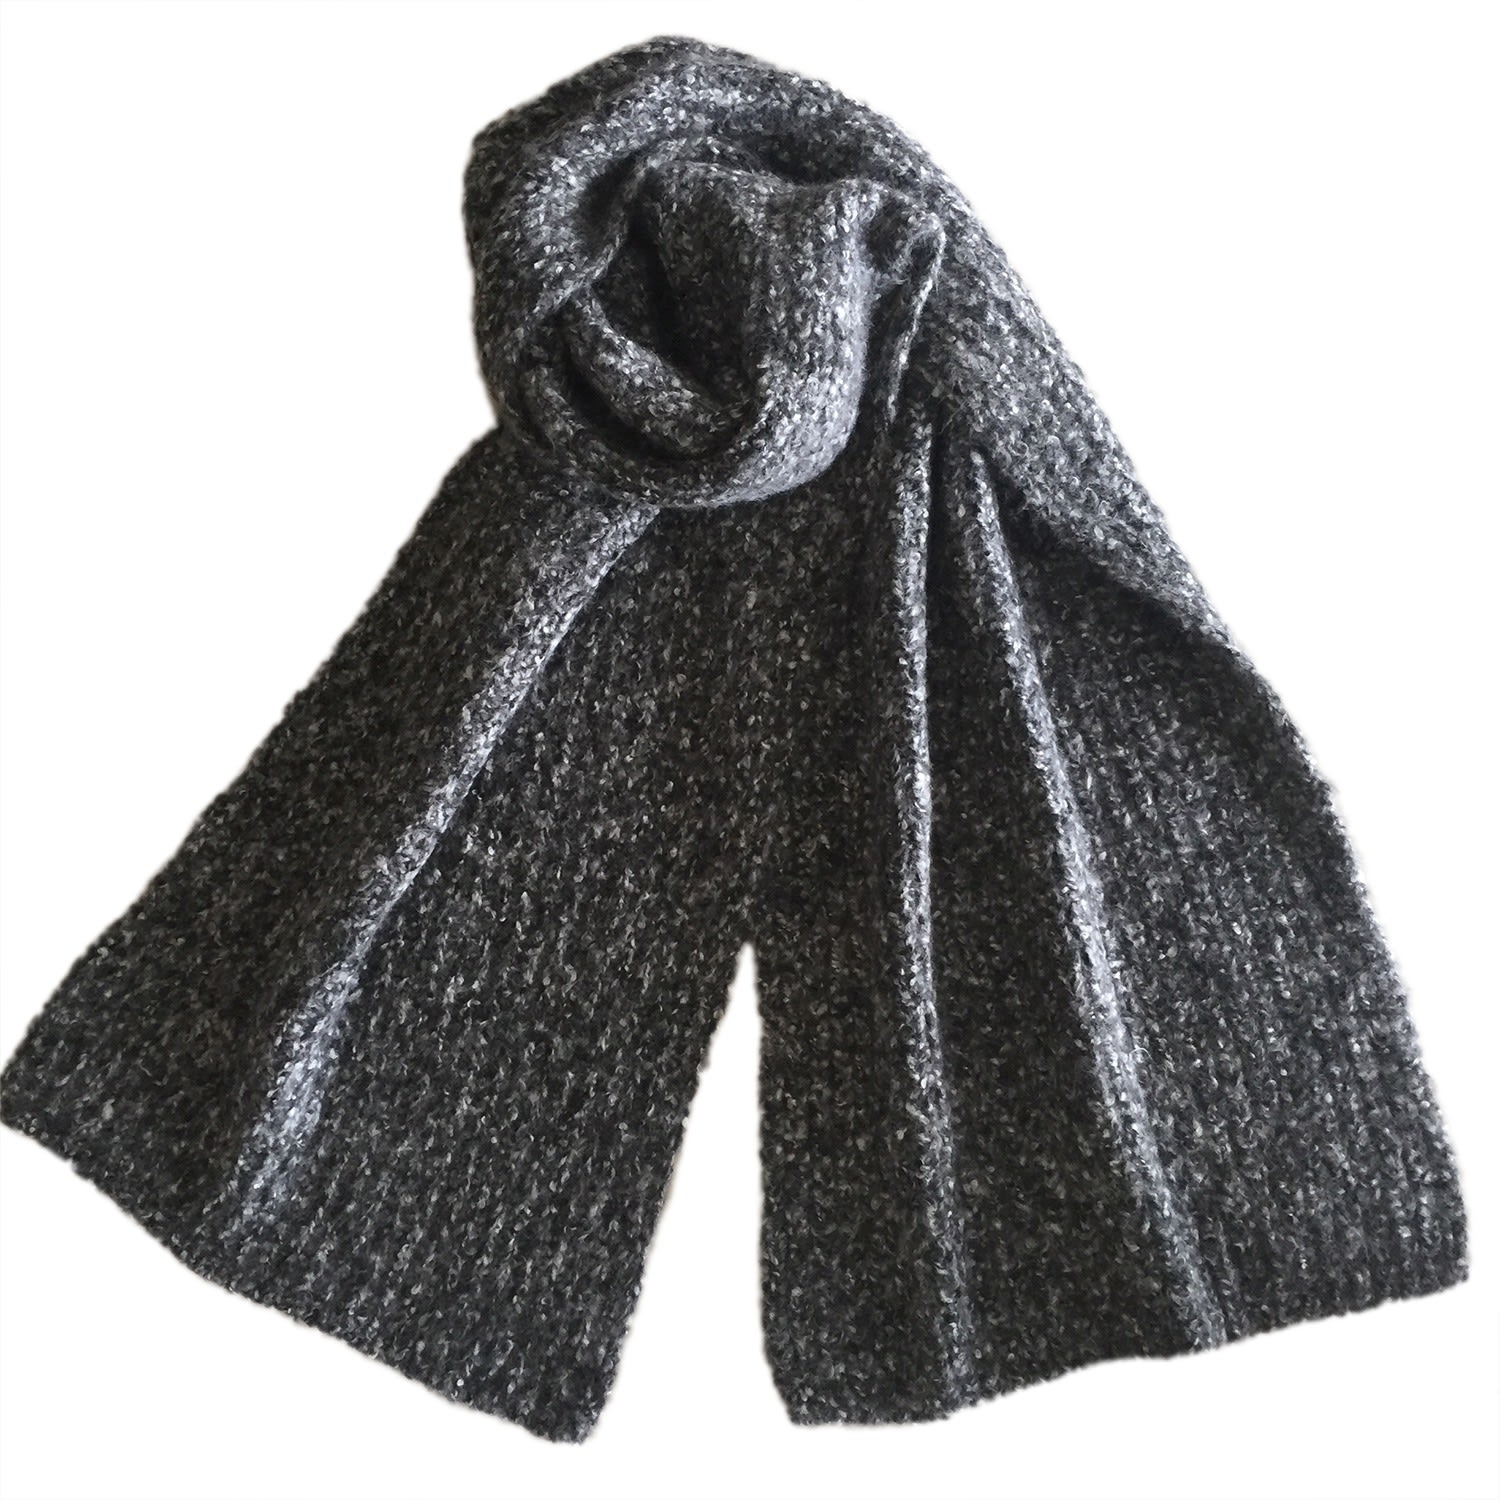 Men's St. Moritz Igloo Hand-Knitted Cashmere Scarf In Anthracite & Light Grey Mélange Grace Cashmere Zurich